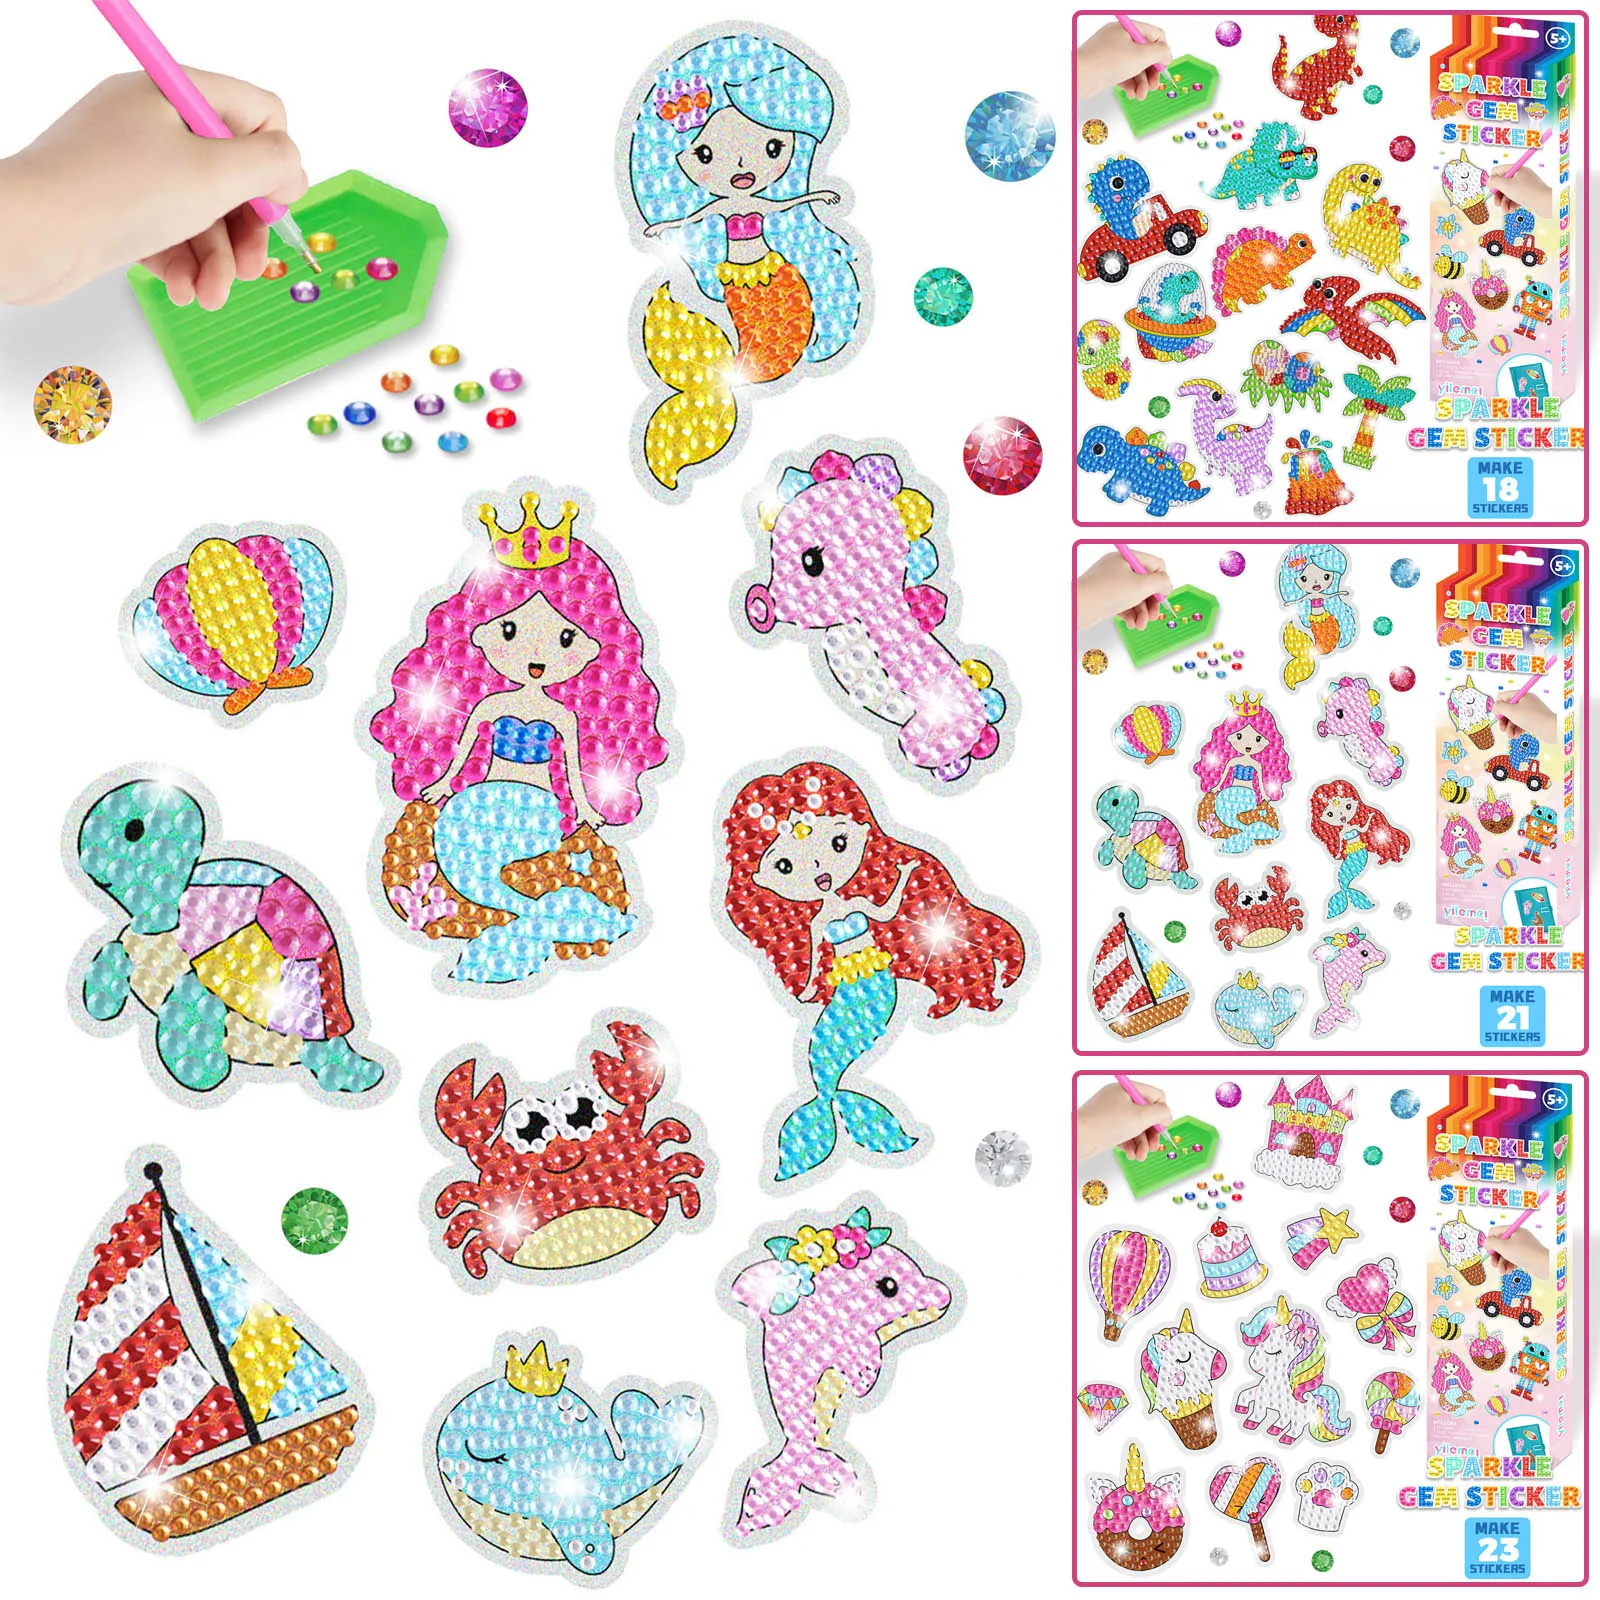 5D DIY Diamond Painting Sticker Kit for Kids Cute Pattern Handmade Sticker Paint Ornament Arts Crafts Gifts for Girls Boys